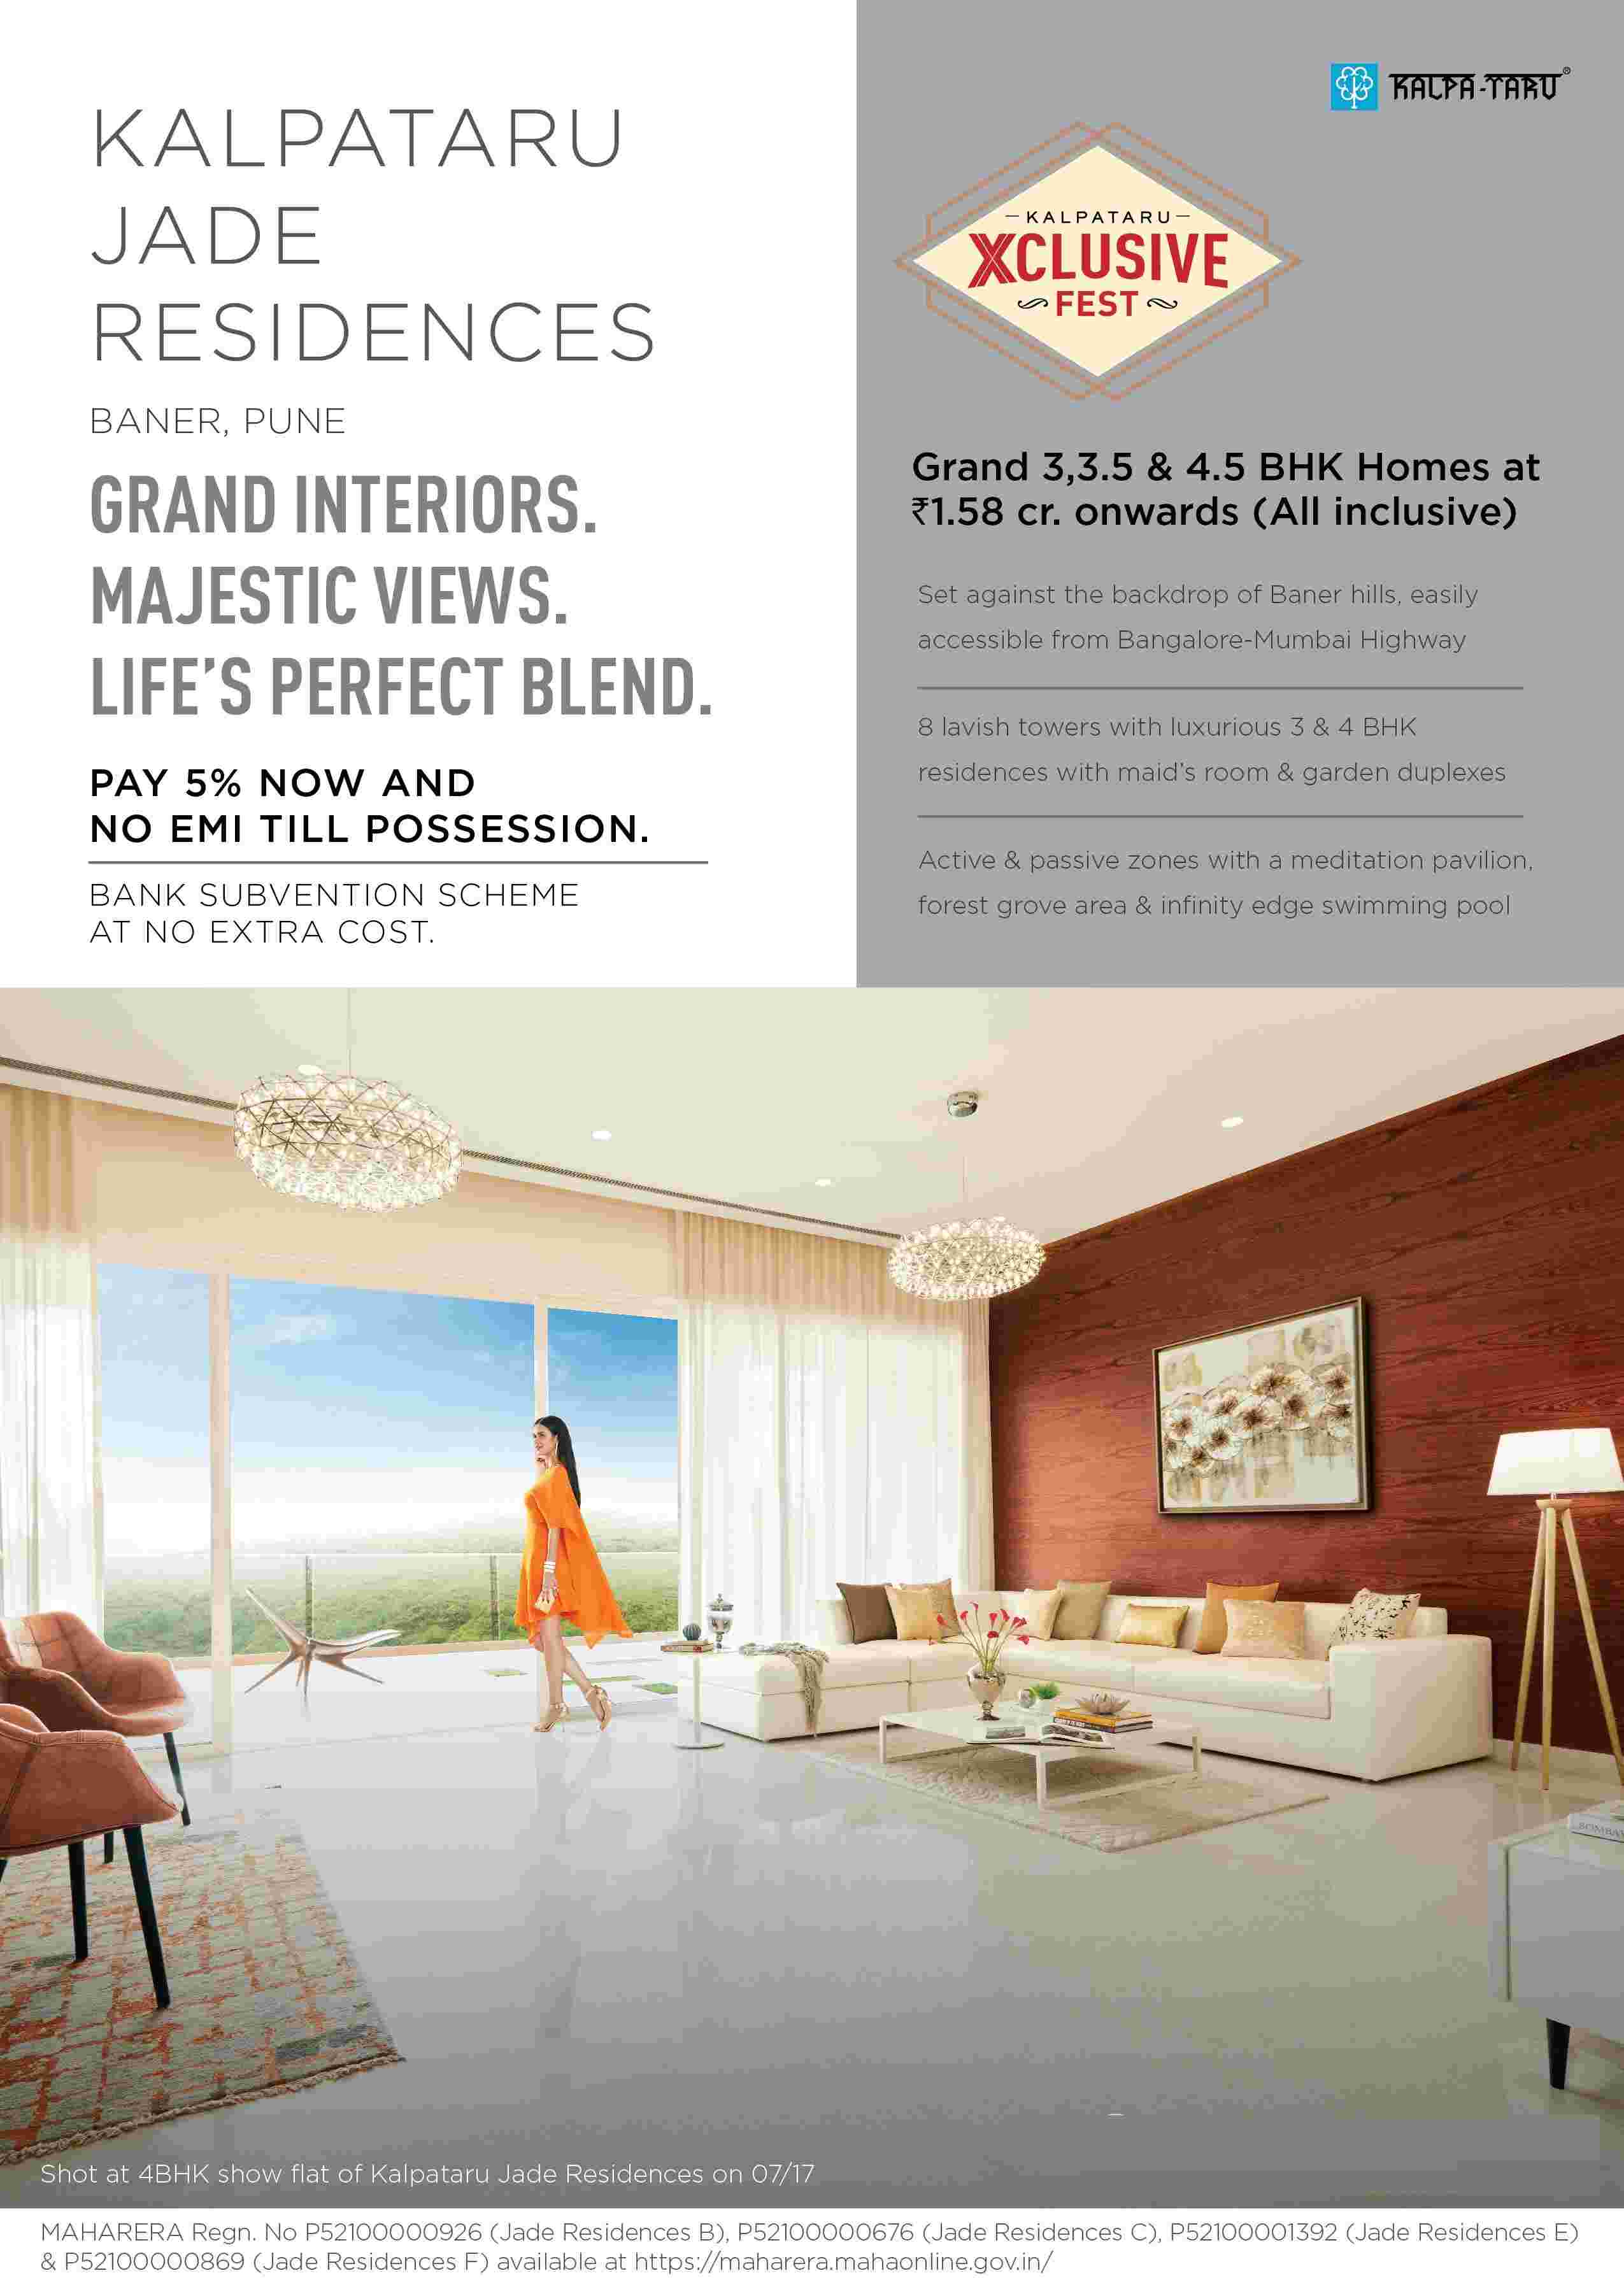 Enjoy the grand life by paying just 5% at Kalpataru Jade Residences in Pune Update